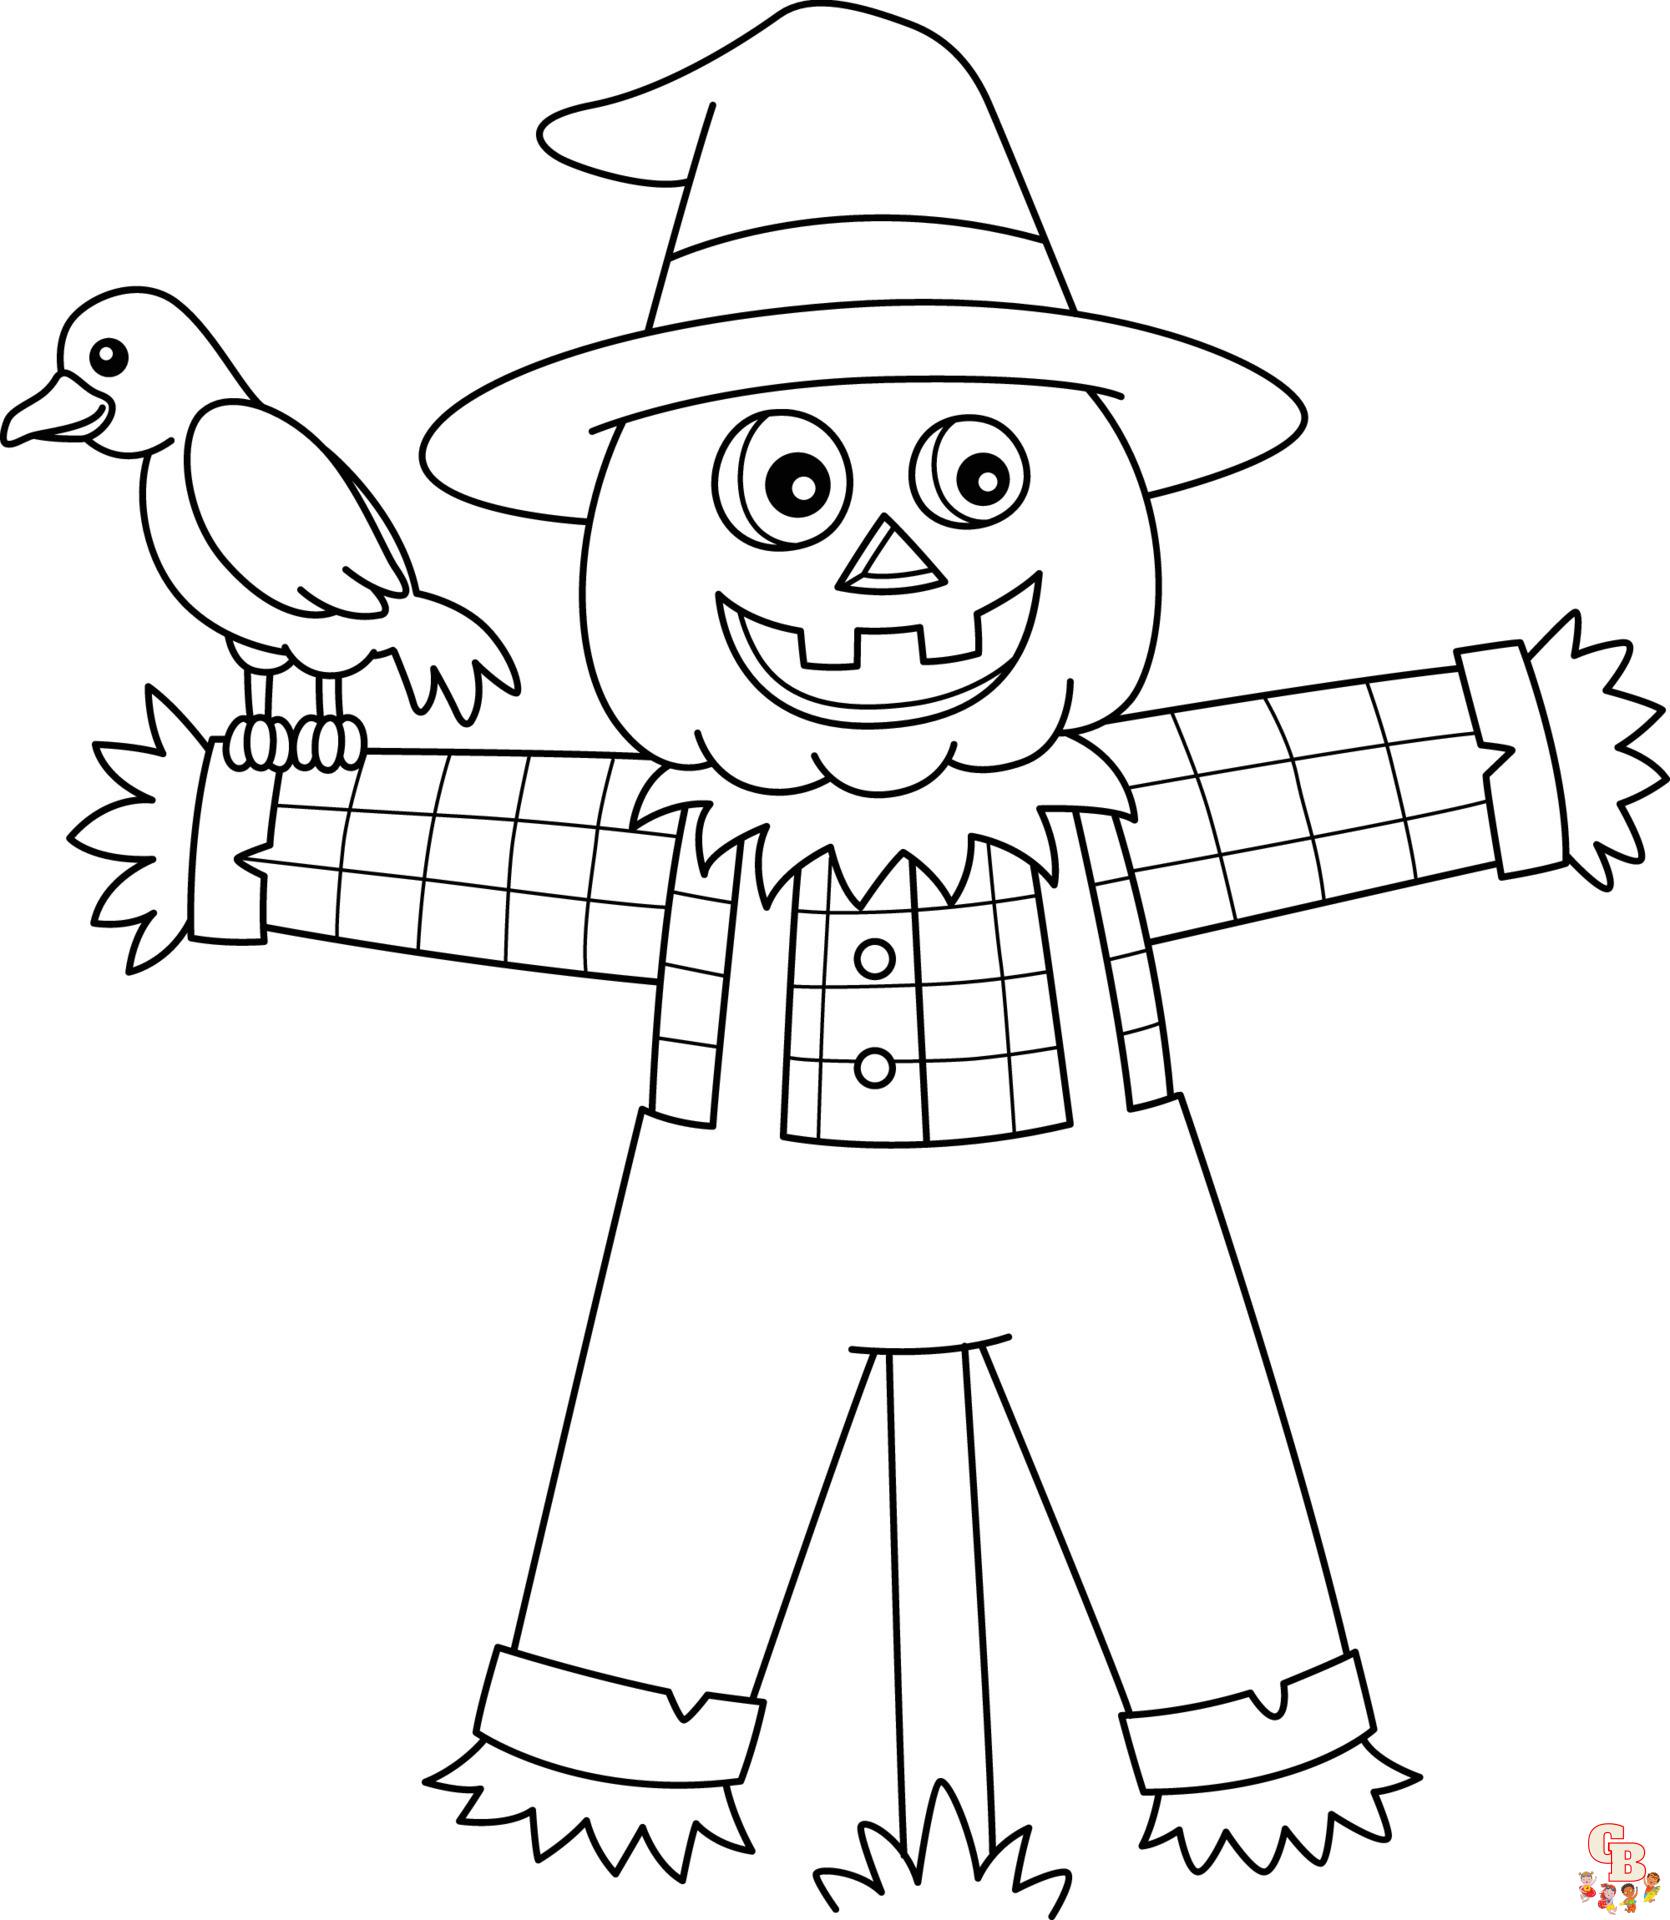 Free scarecrow coloring pages printable for kids